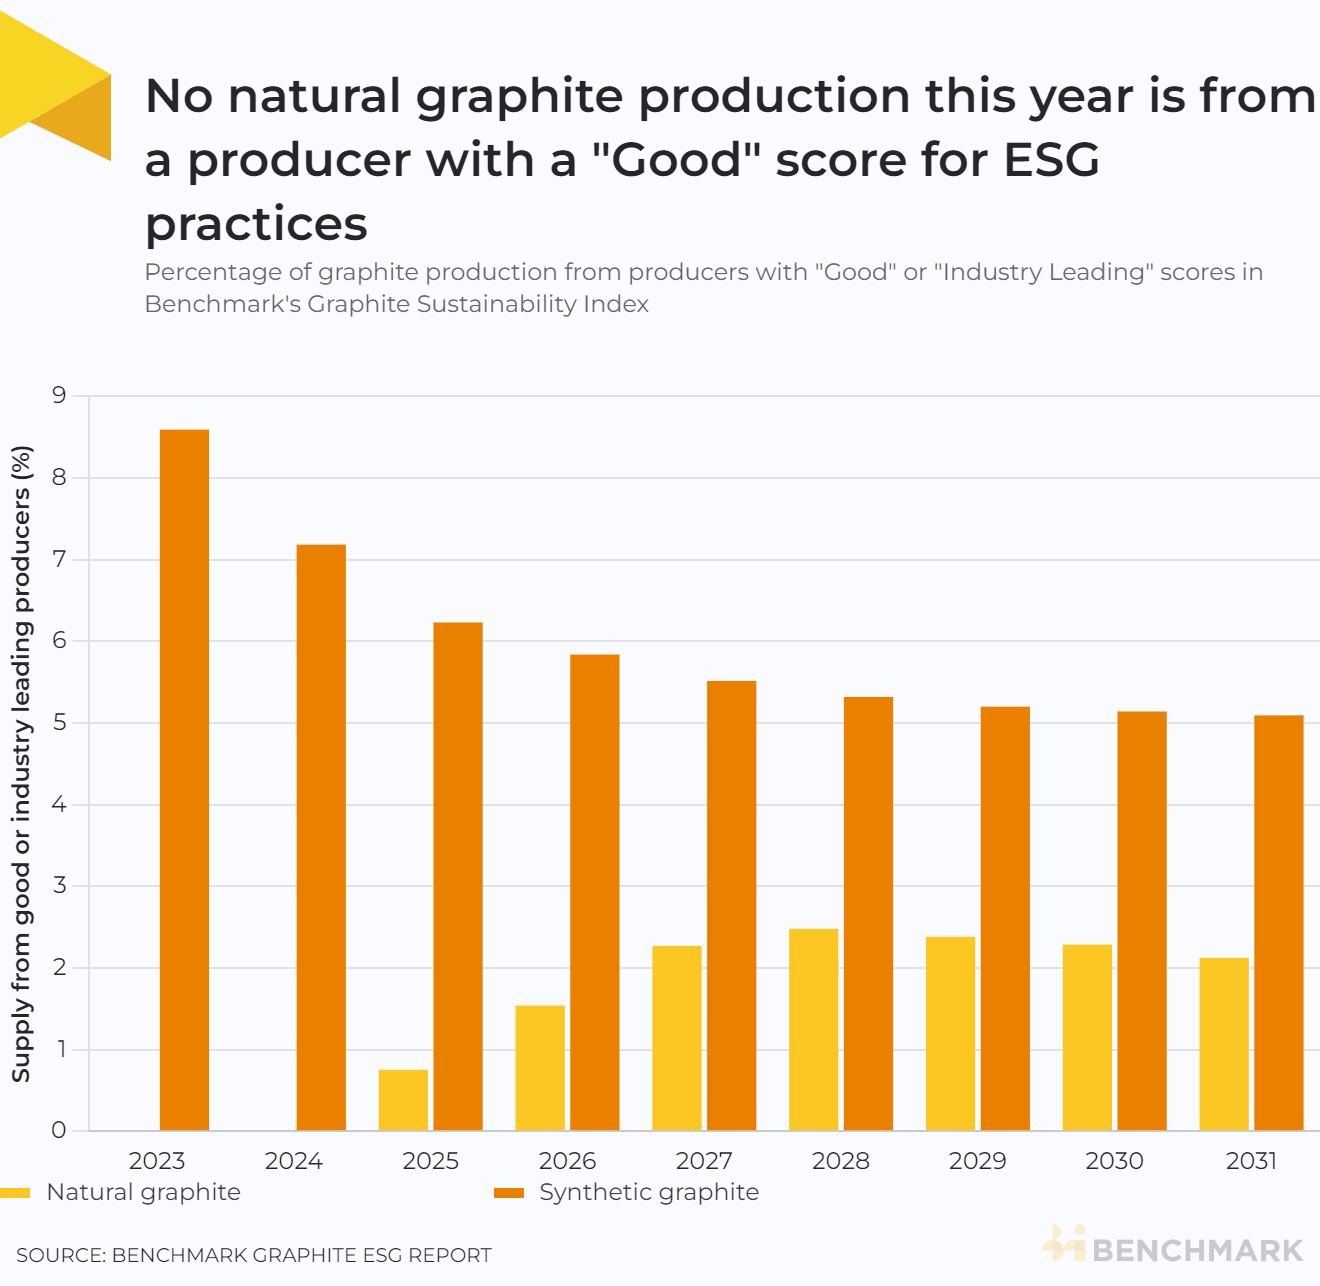 No natural graphite production this year is from a producer with "Good" esg practices